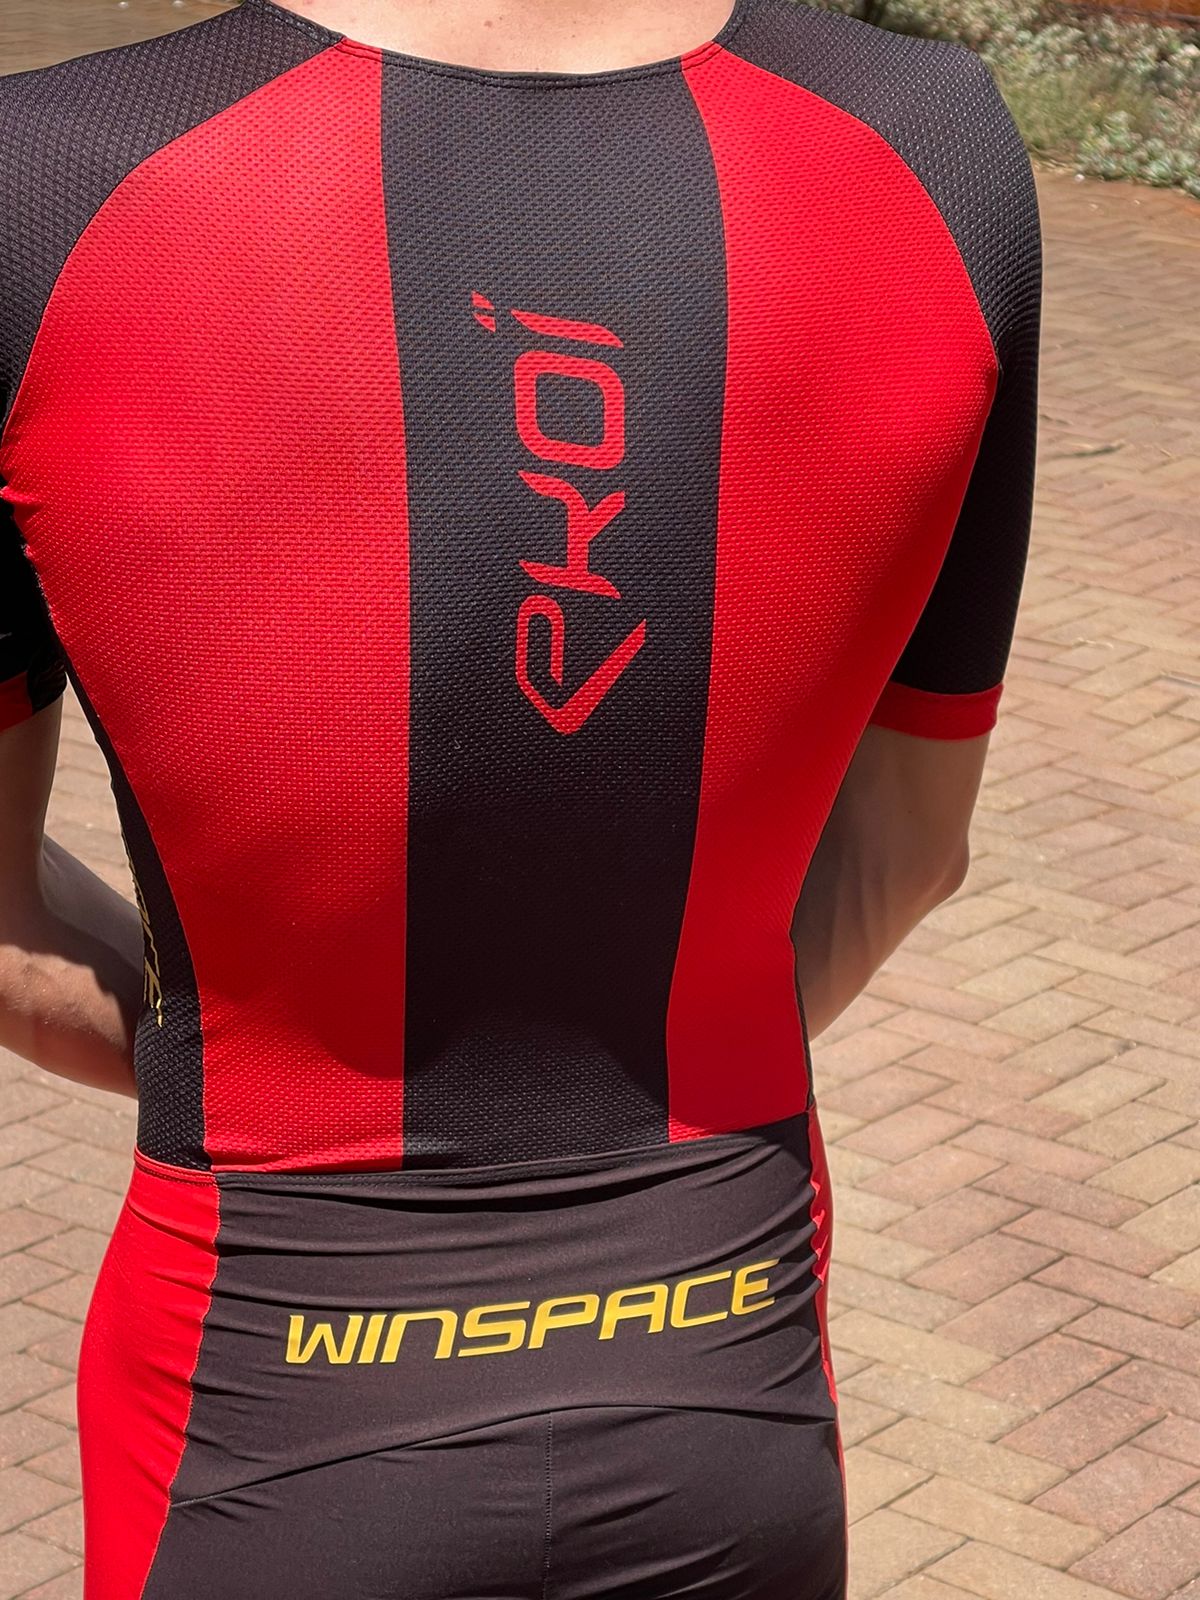 Matthew Greer envisions crossing the finish line, donning the Winspace Tri Suit, a dream yet to be realized at Ironman 70.3 Mosselbay.